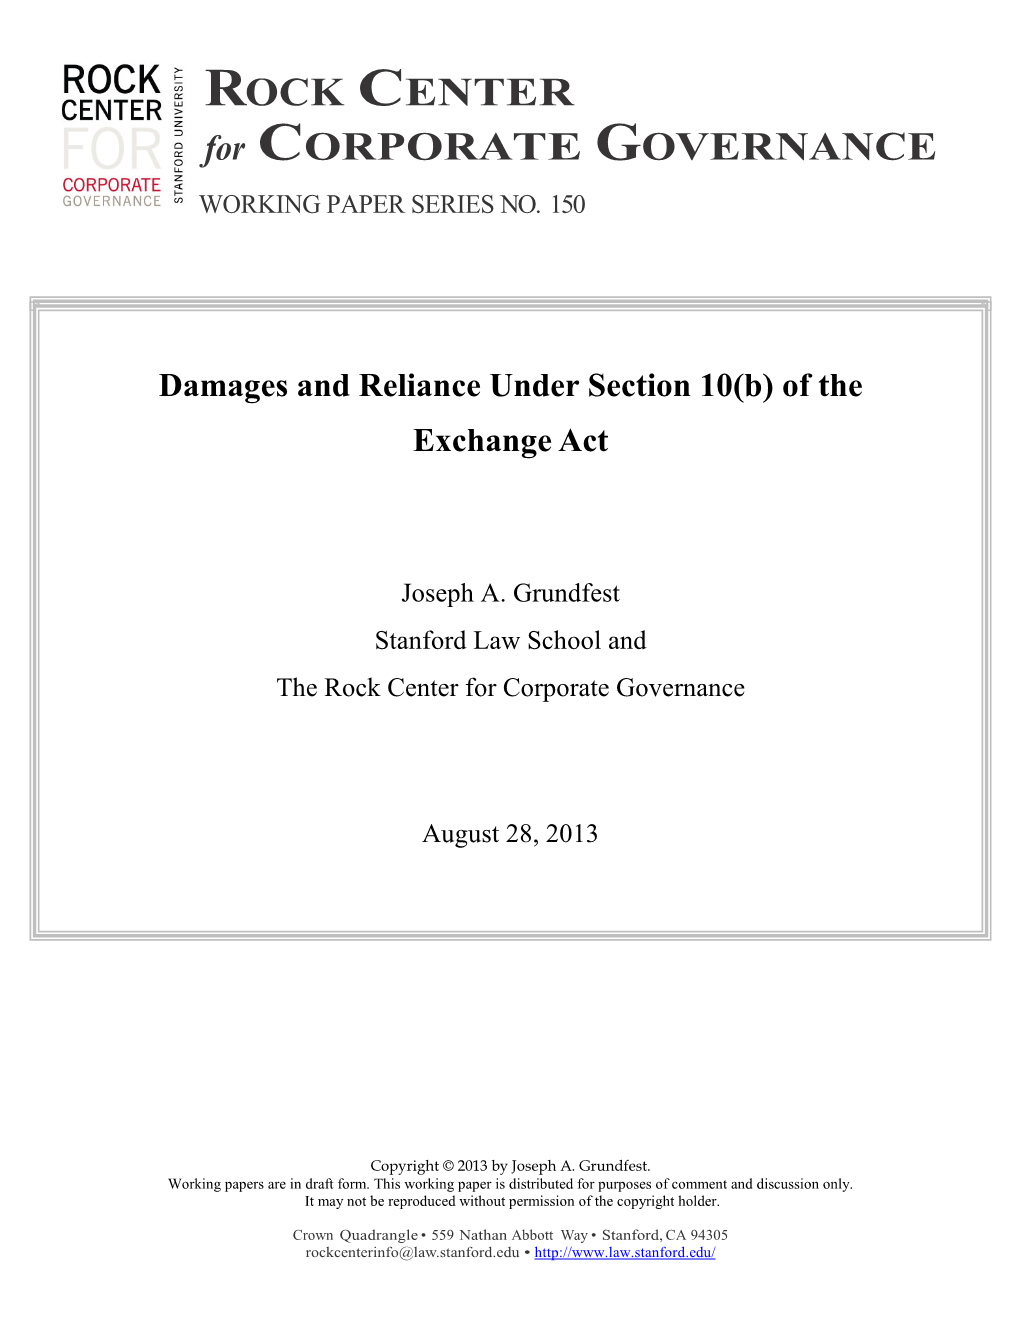 Damages and Reliance Under Section 10(B) of the Exchange Act